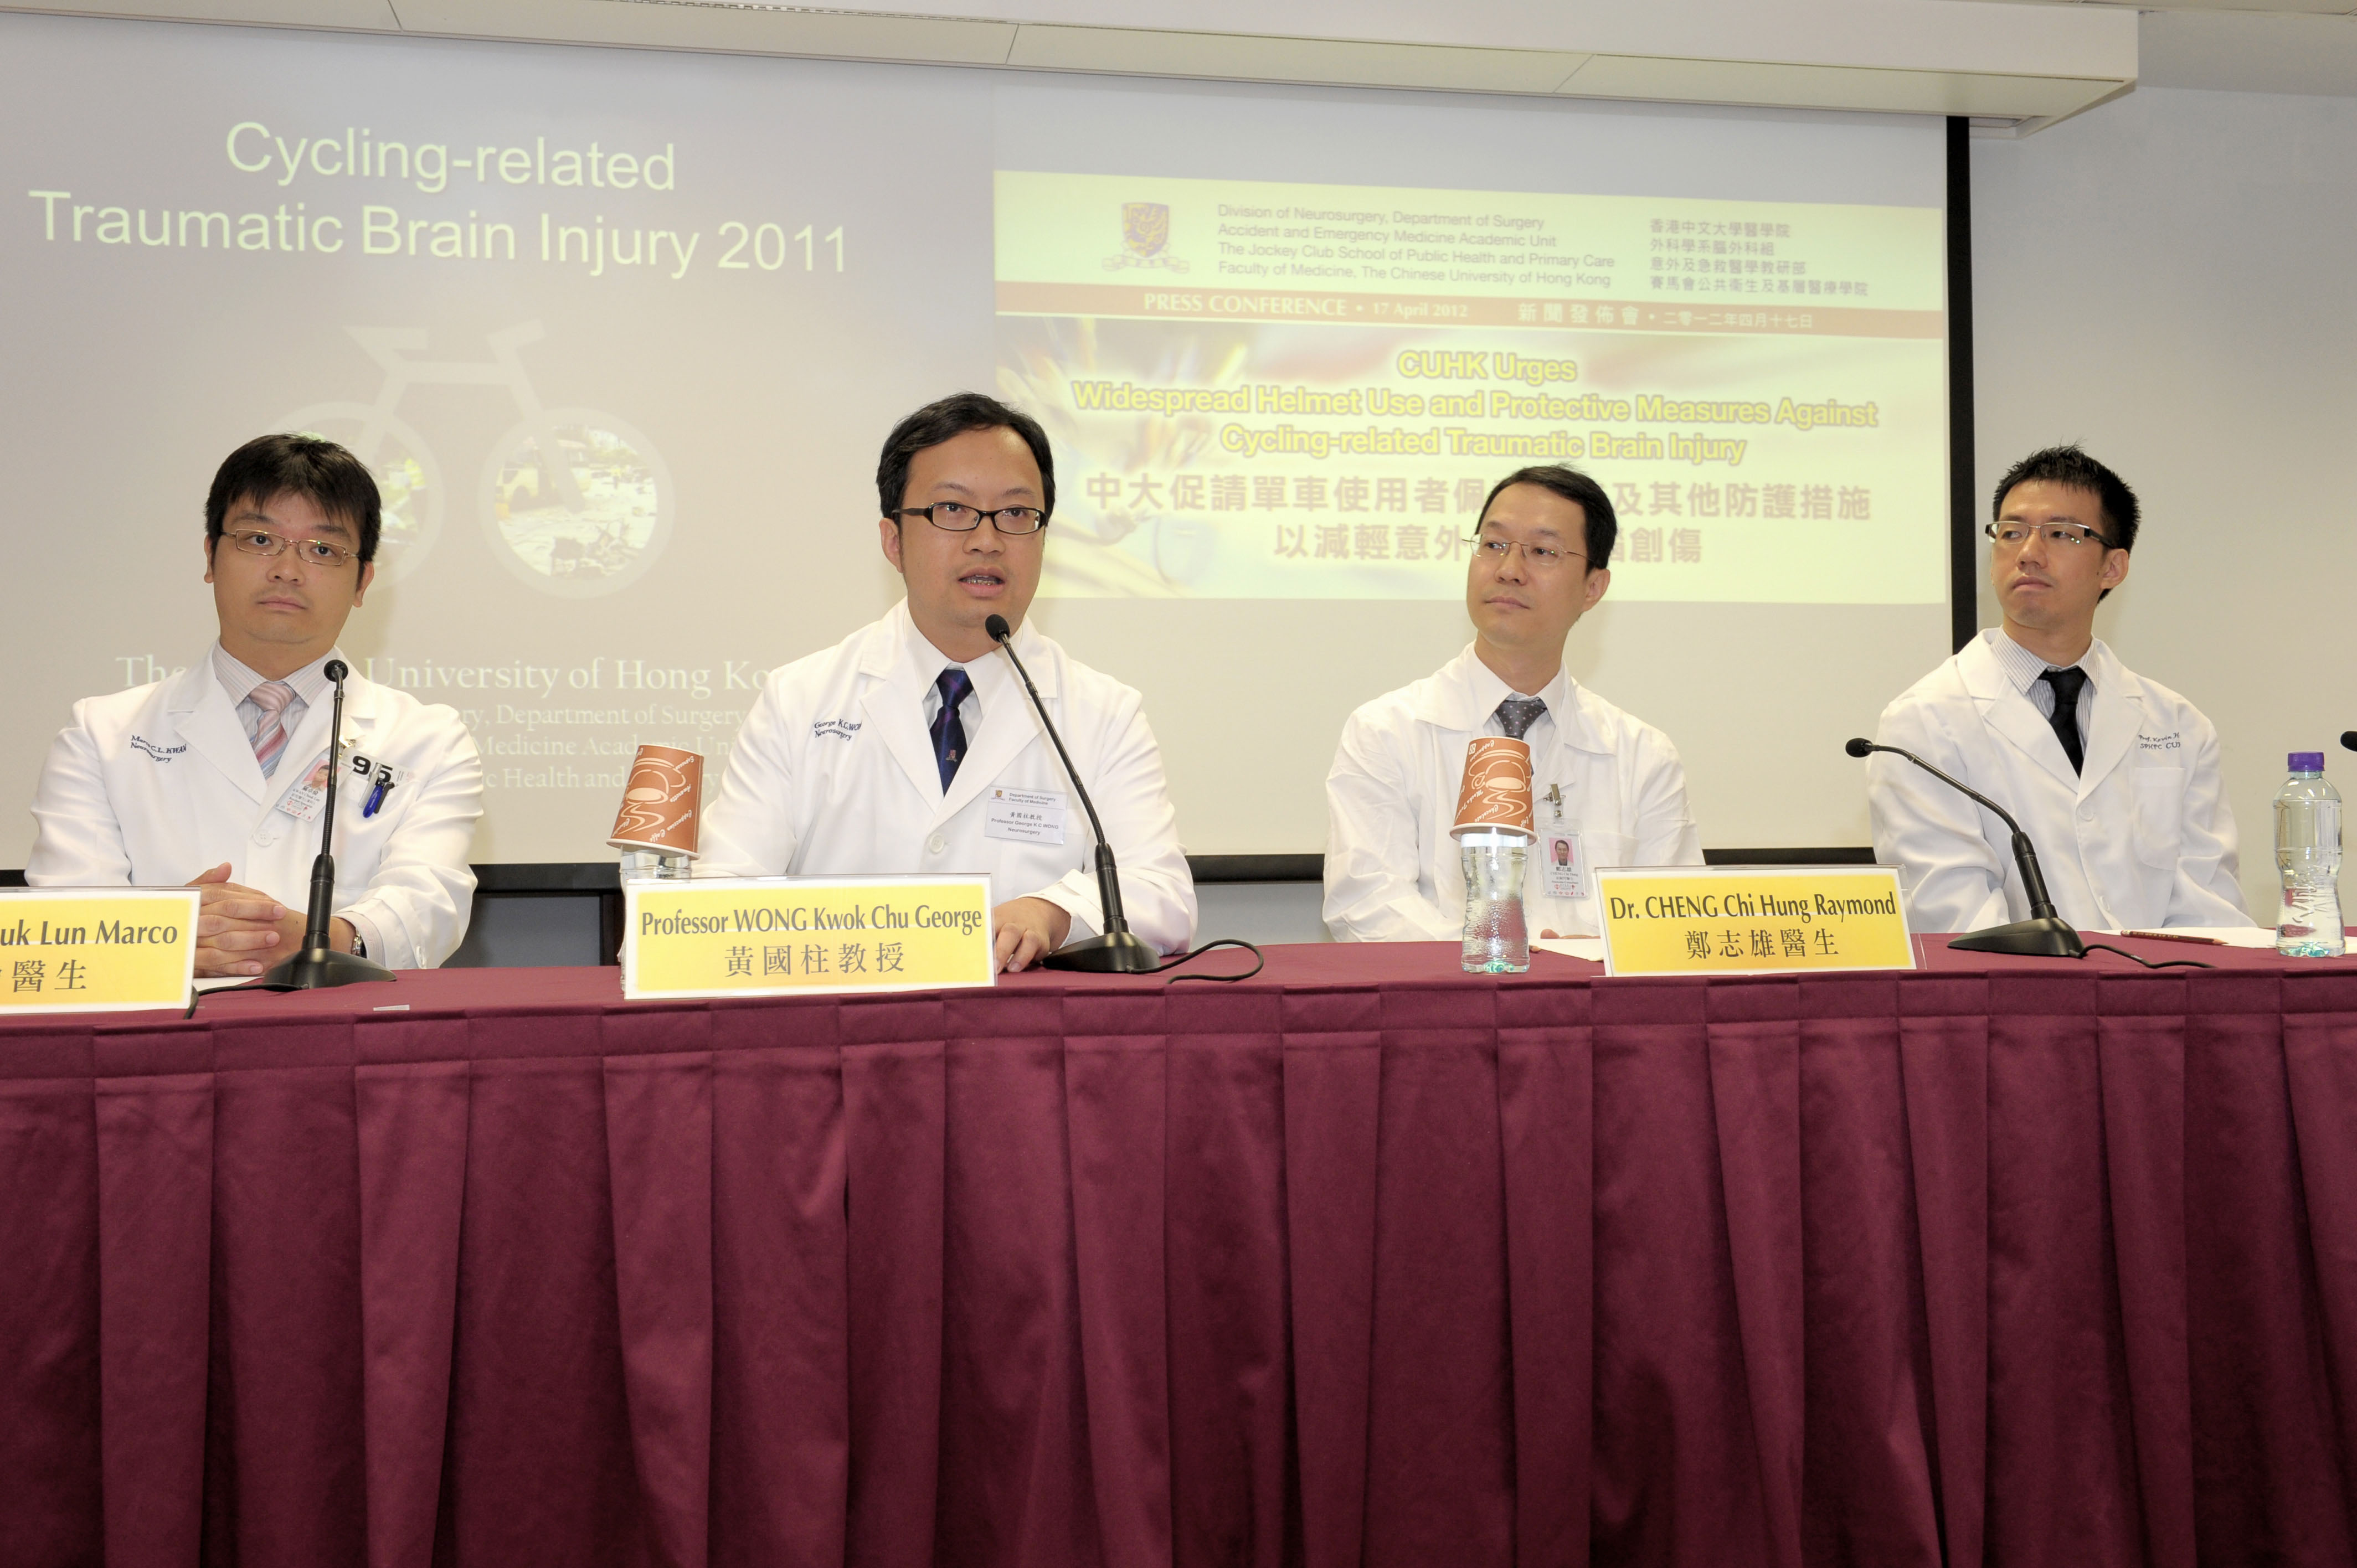 CUHK present the findings of CUHK survey on cycling-related traumatic brain injury and advocate widespread helmet use and protective measures among the general public to reduce cycling-related traumatic brain injury